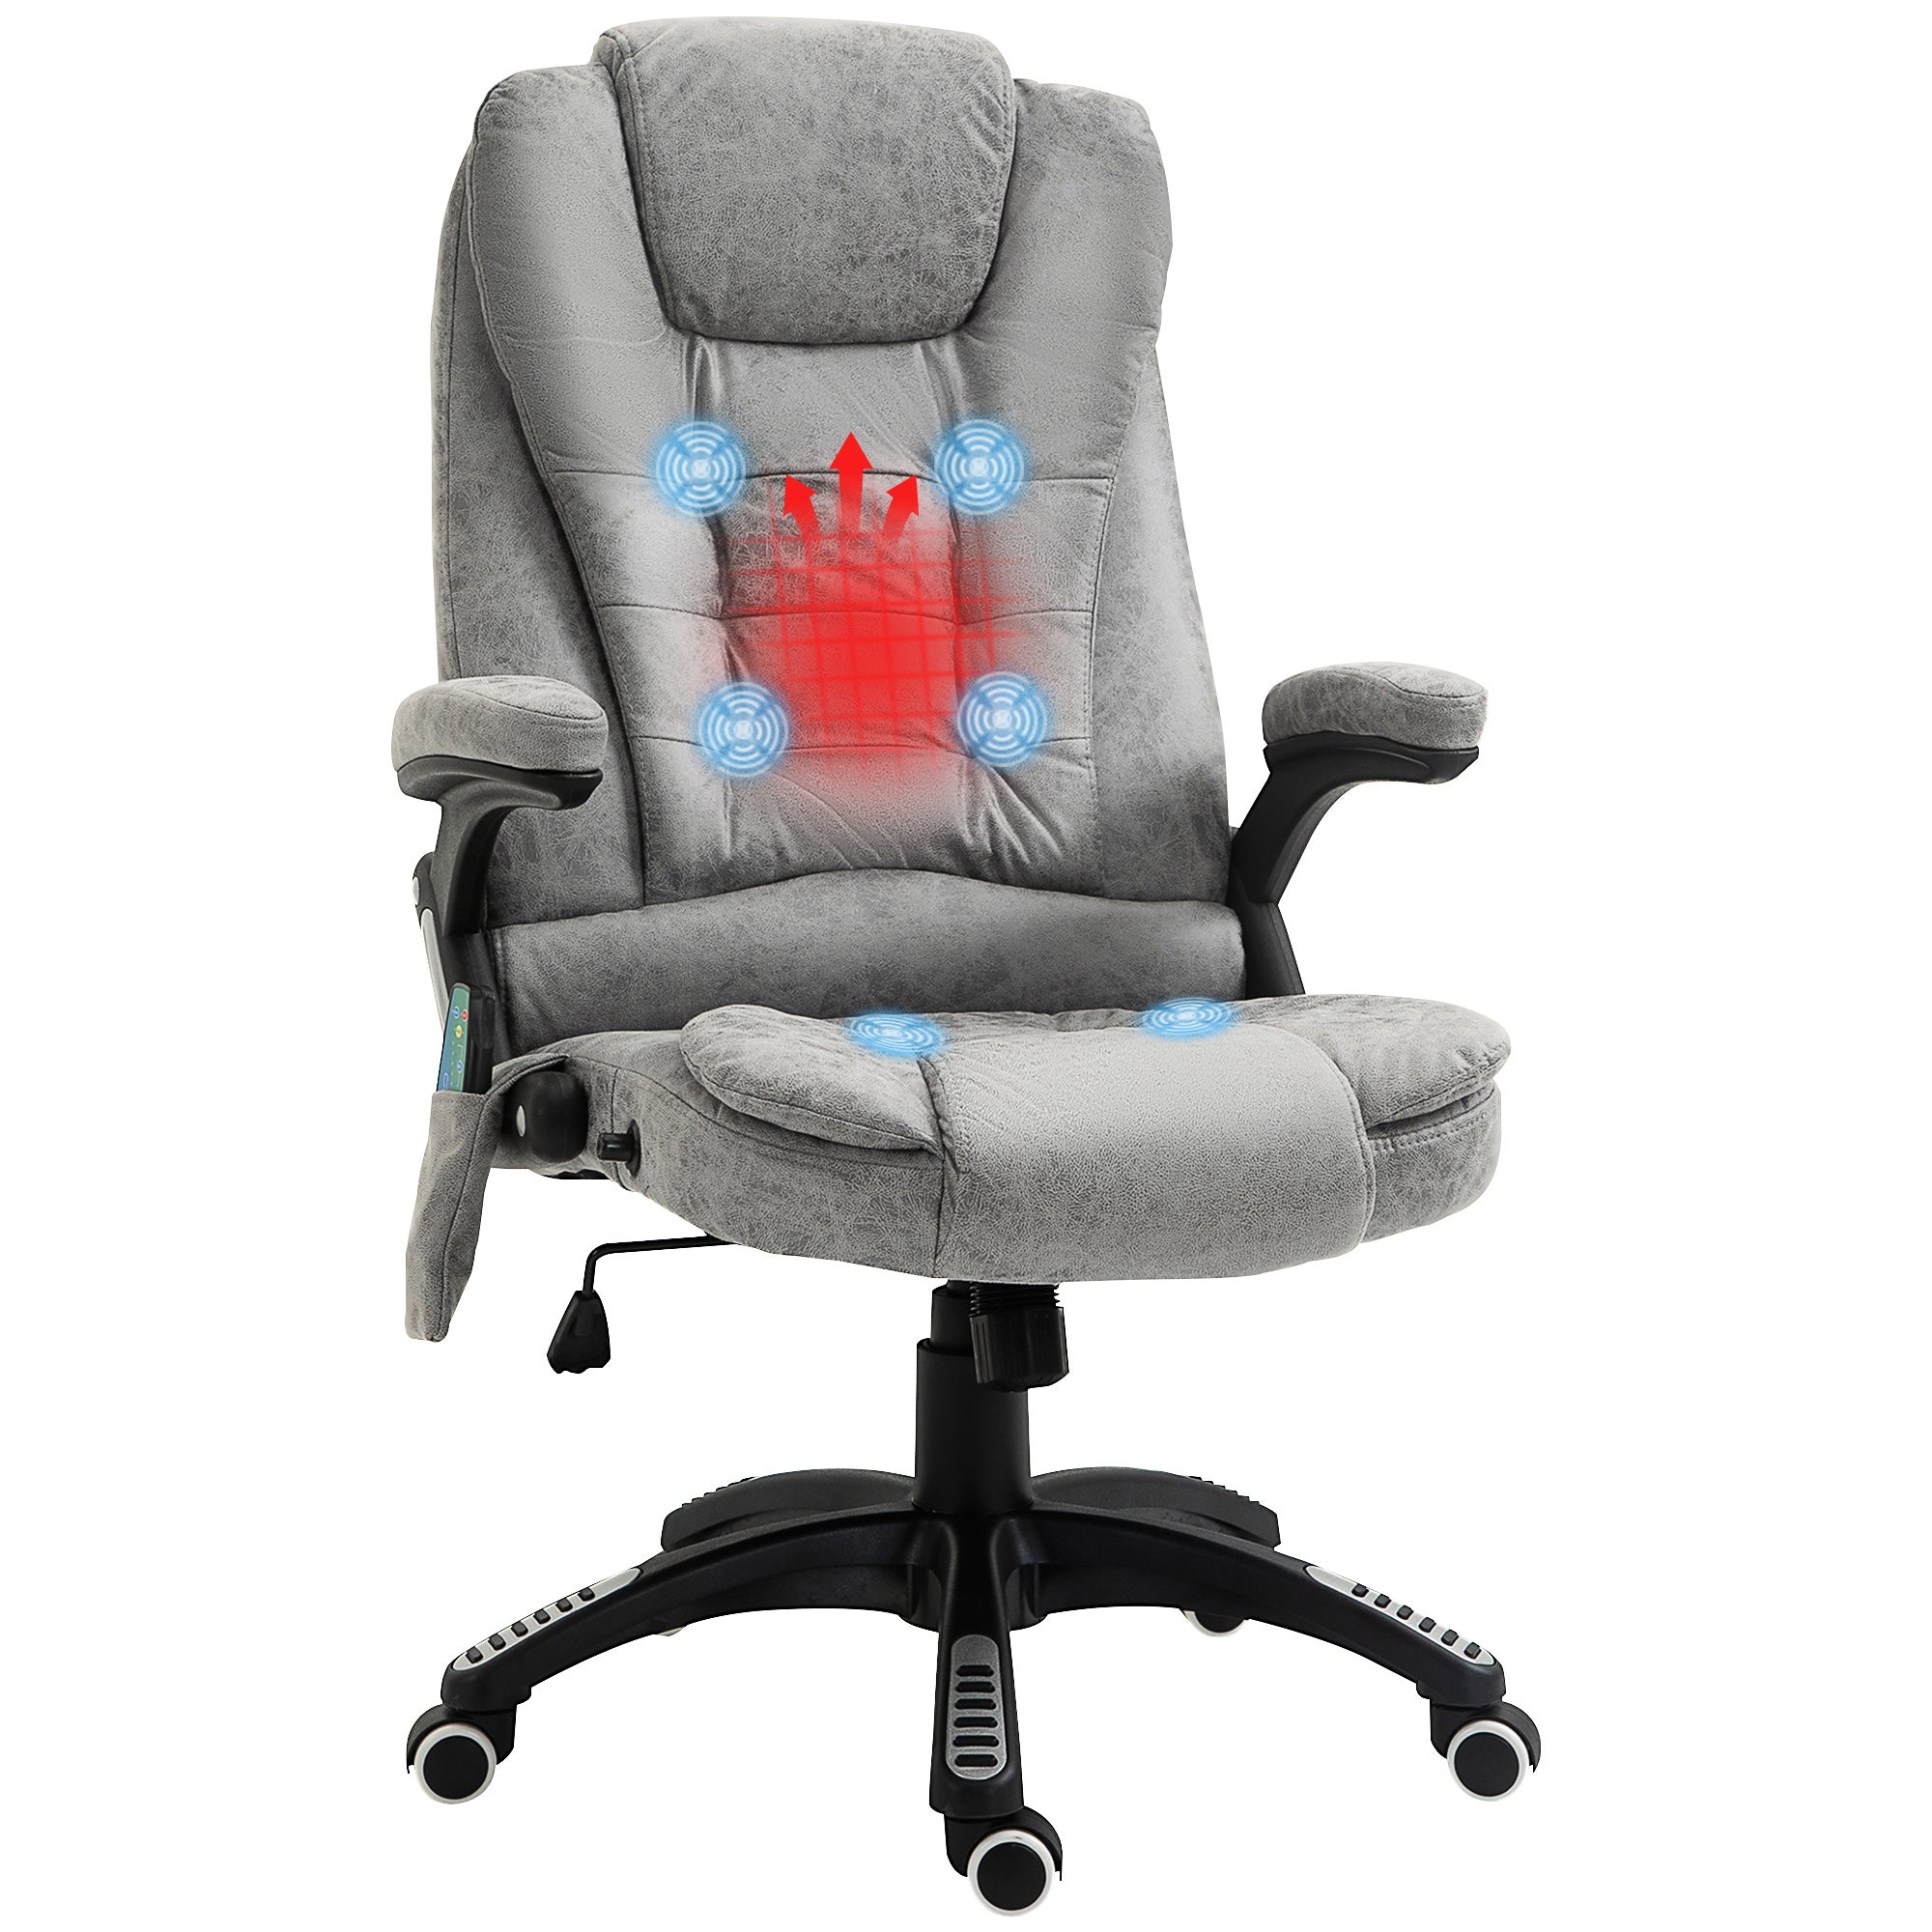 Vinsetto Office Chair w/ Heating Massage Points Relaxing Reclining Grey  | TJ Hughes